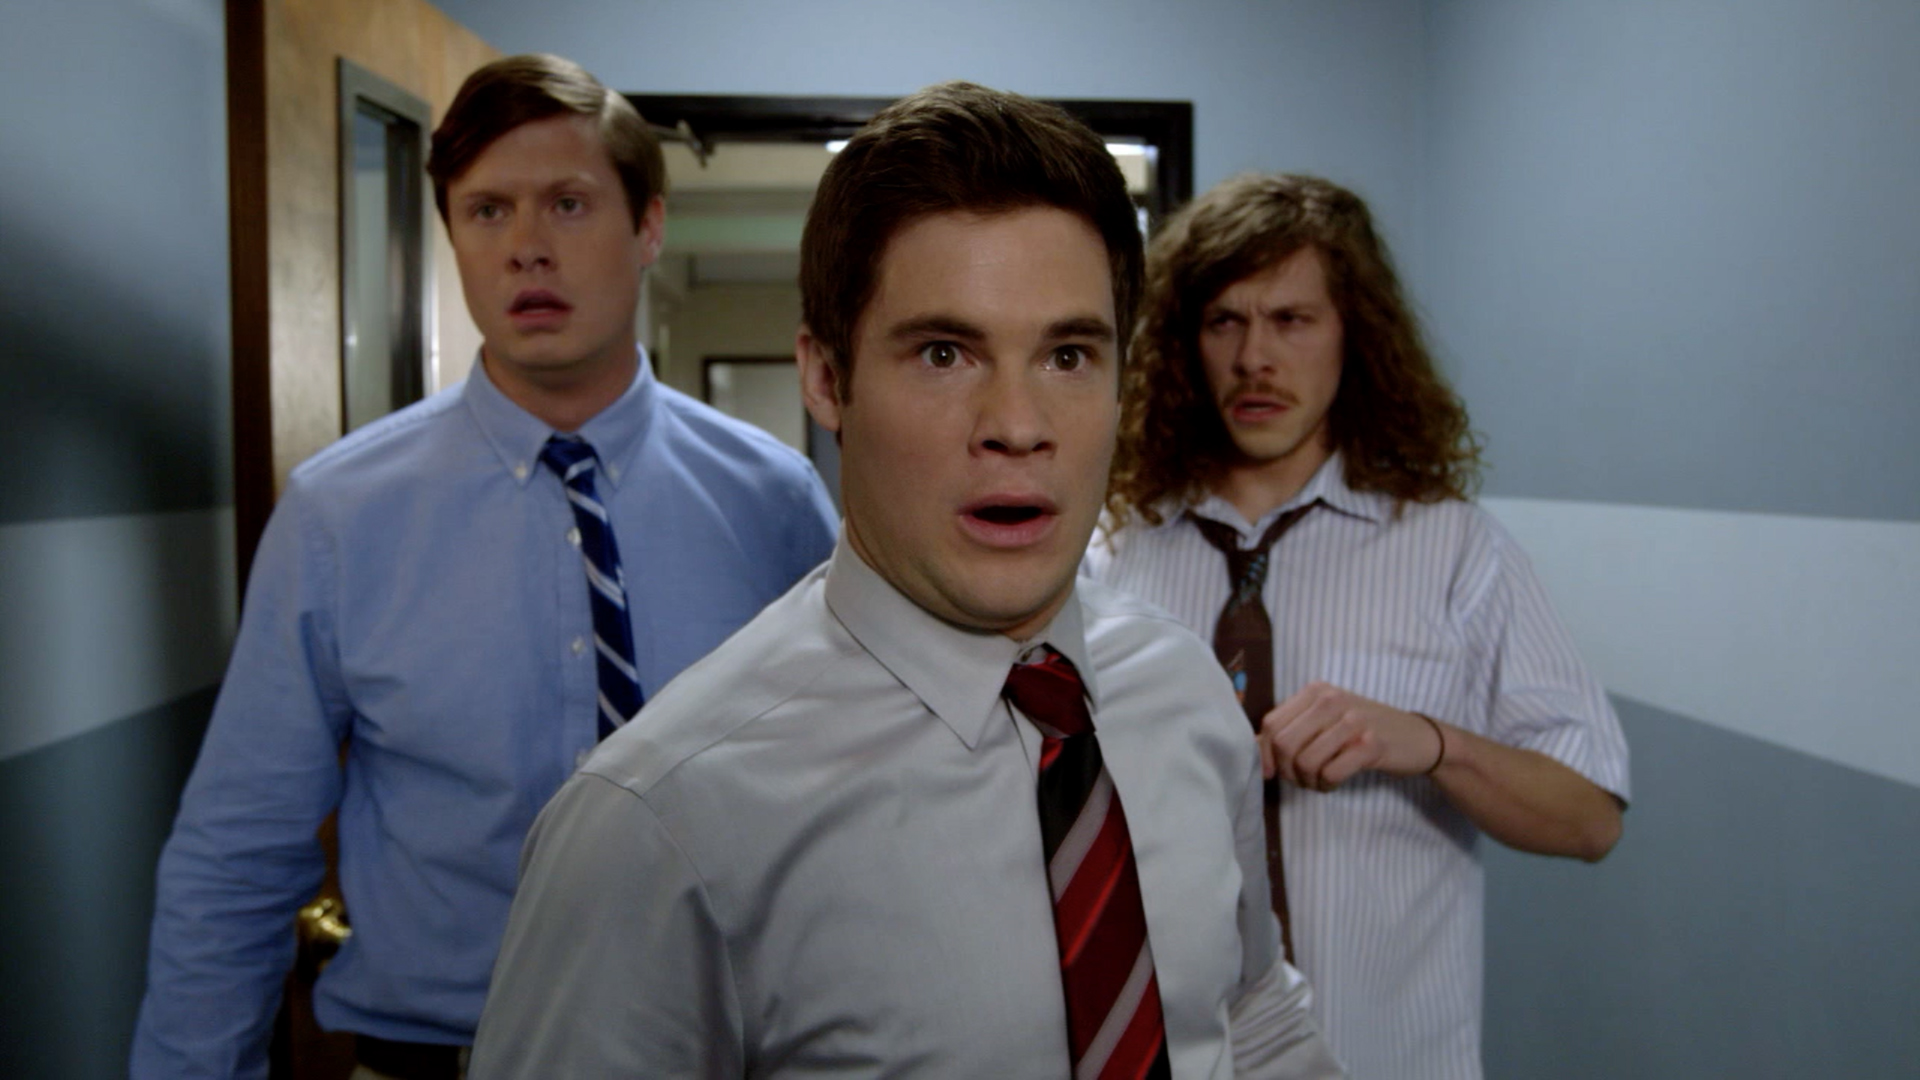 HD Quality Wallpaper | Collection: TV Show, 1920x1080 Workaholics